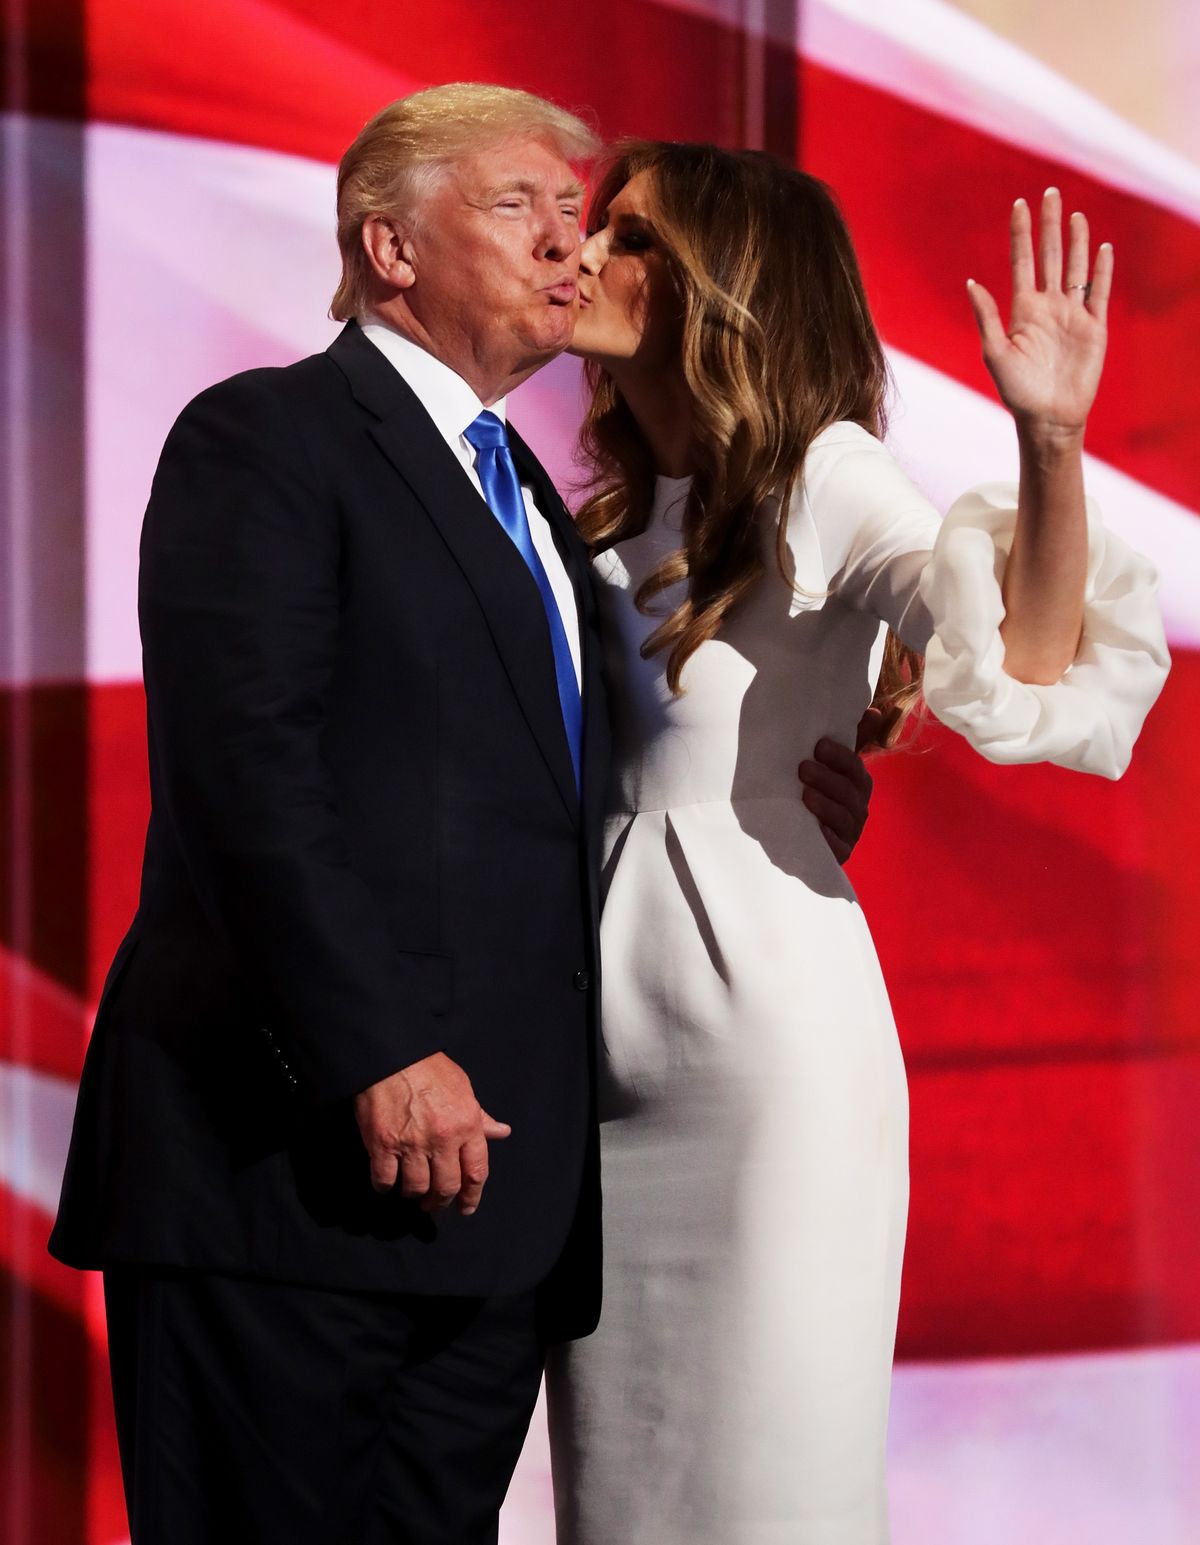 Melania Trump kisses Donald Trump at the Republican National Convention on July 18, 2016, in Cleveland, Ohio | Photo: Chip Somodevilla/Getty Images